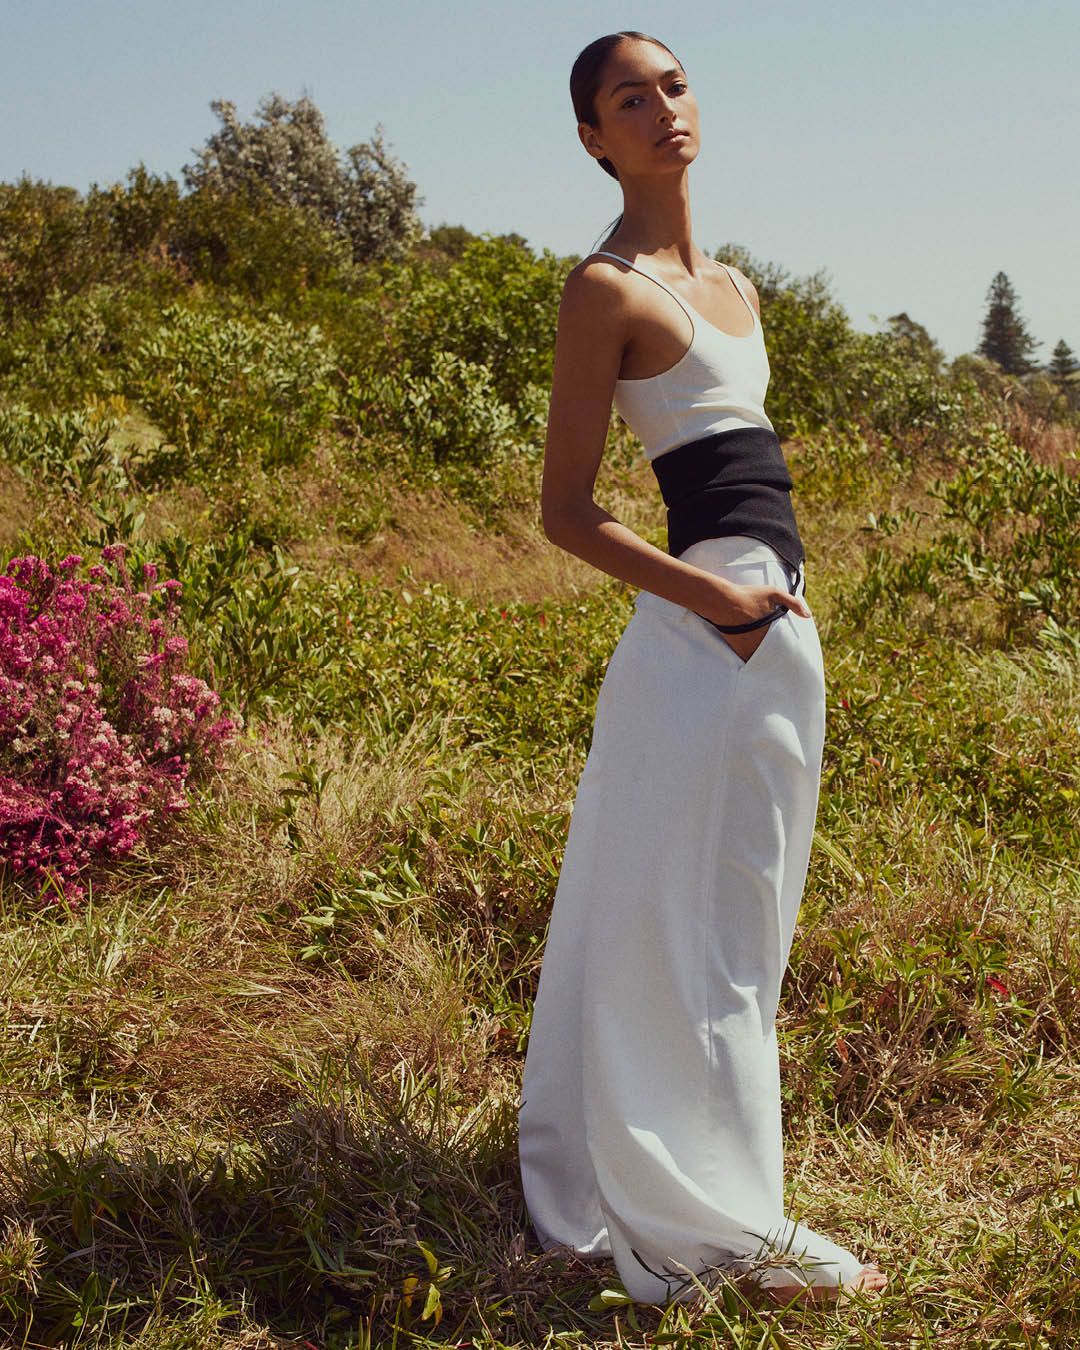 Model standing on grass with hands in pockets wearing a white singlet and white wide-leg trousers